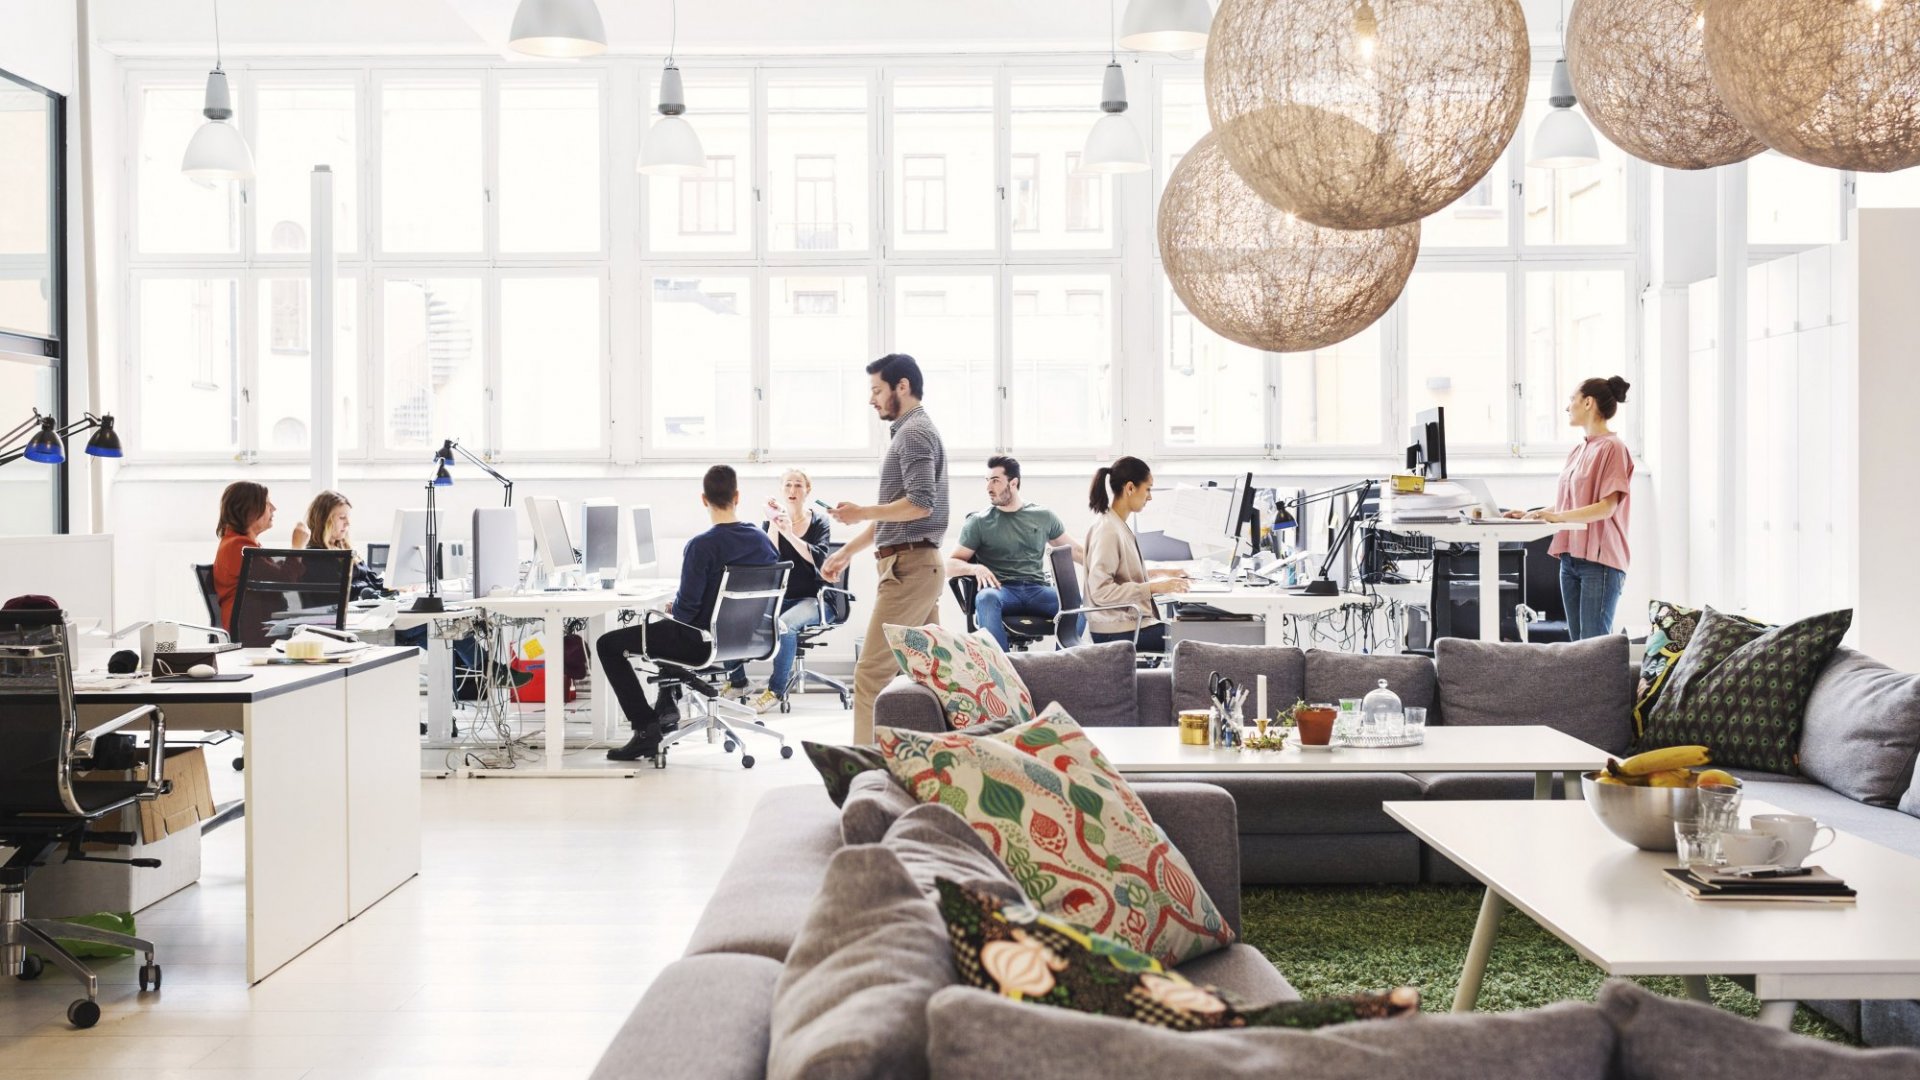 3 ways of office design to make your employees more productive and happy